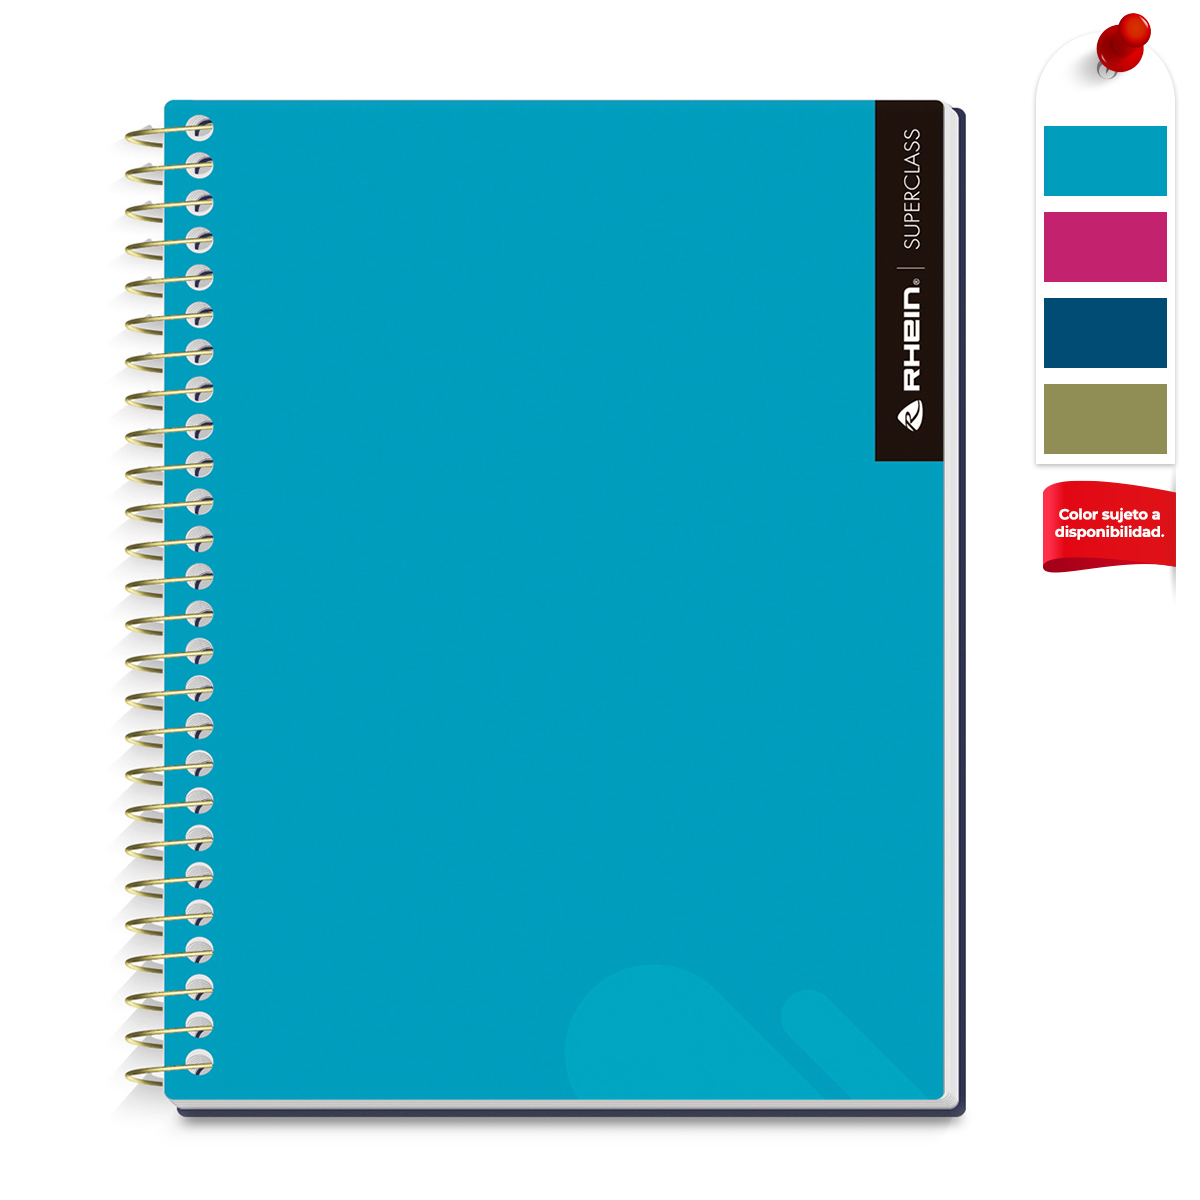 CUADERNO WORK PROF 150 LINEA | Office Depot Mexico